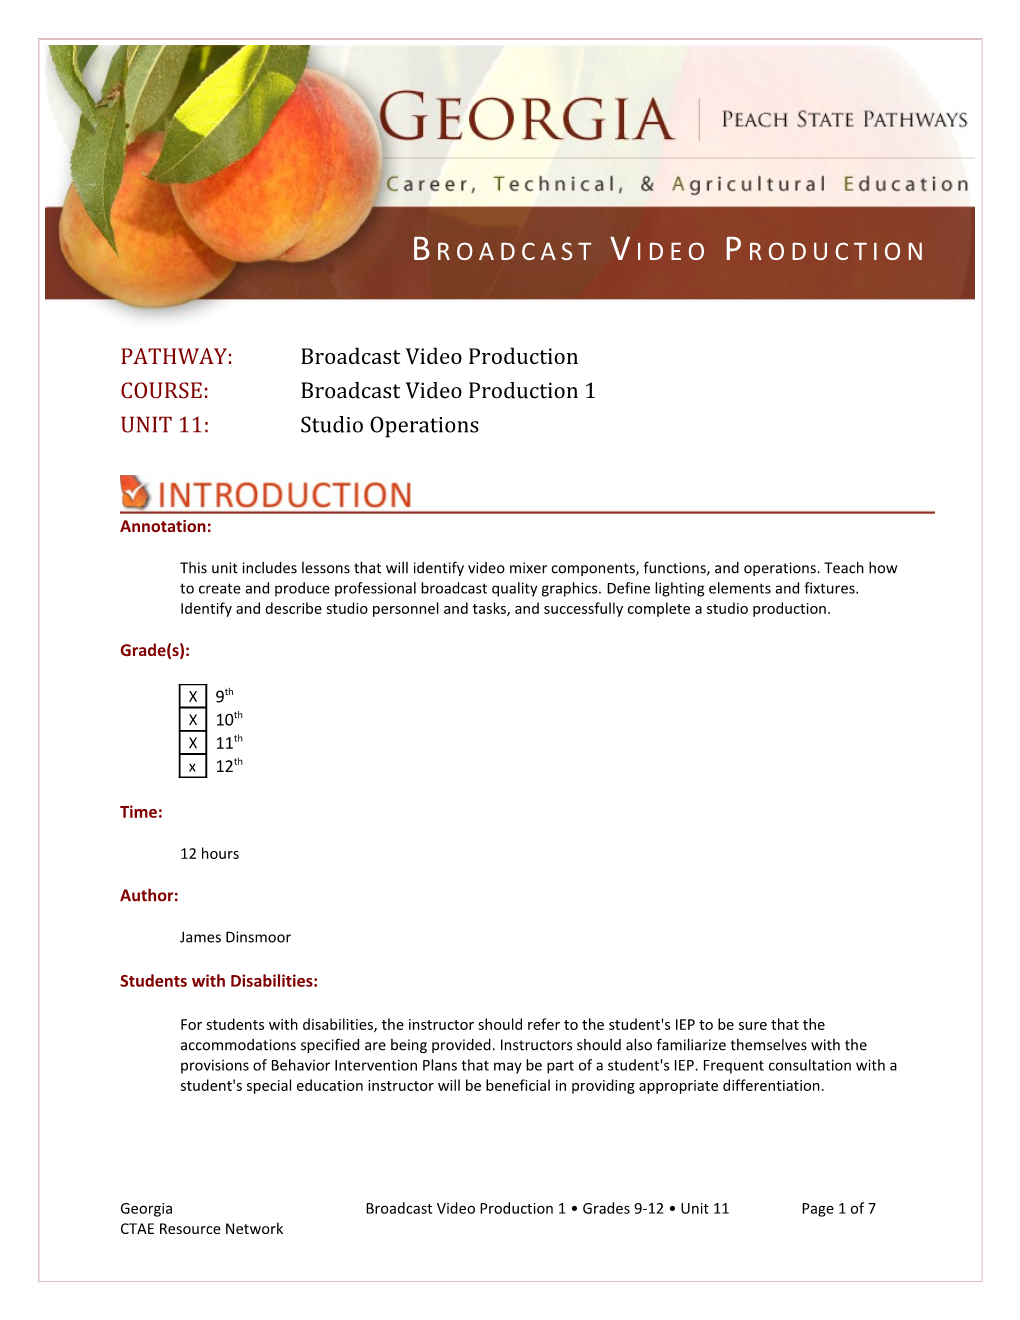 PATHWAY: Broadcast Video Production